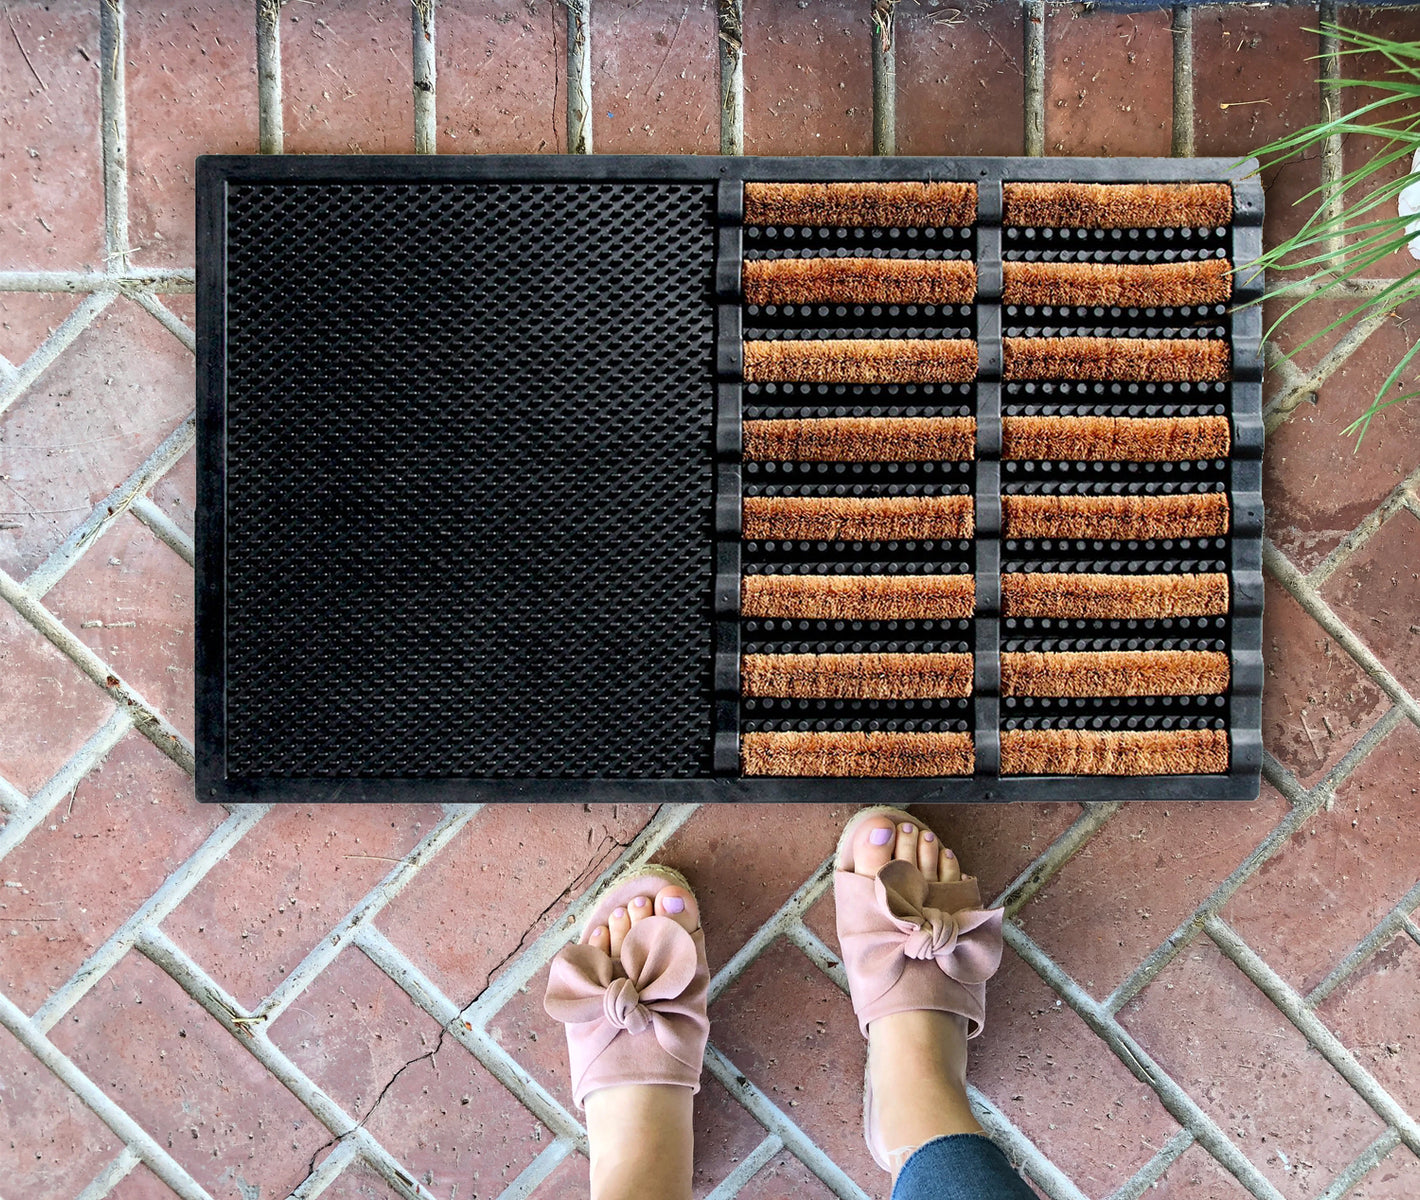 OnlyMat Brush Coir Entrance with Rubber Tray Mat - Best for high traffic entrance - Sanitisation Mat - Indoor / Outdoor, Waterproof